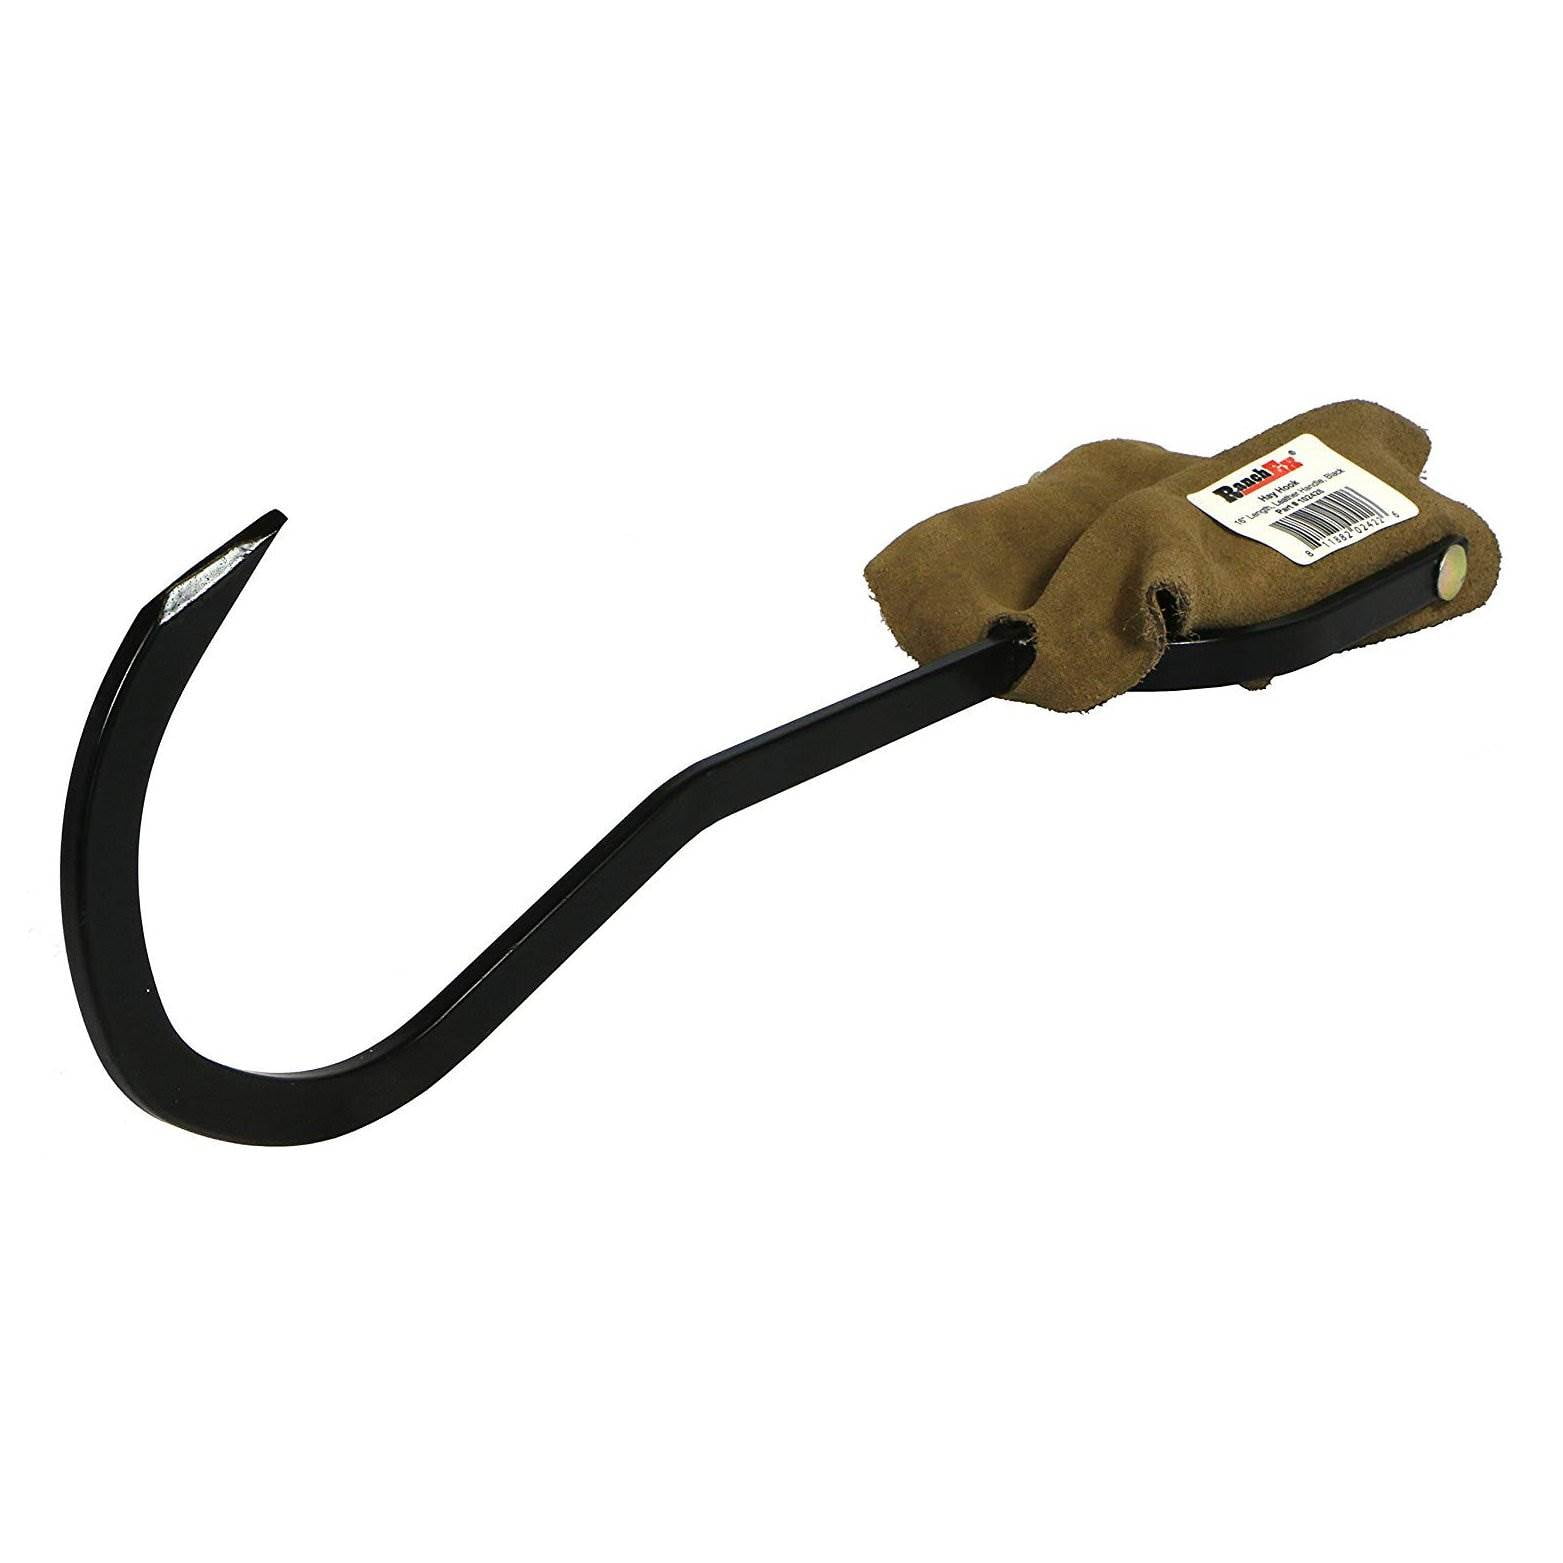 RanchEx 11in Overall Length Hay Bale Hook Farm Tool 